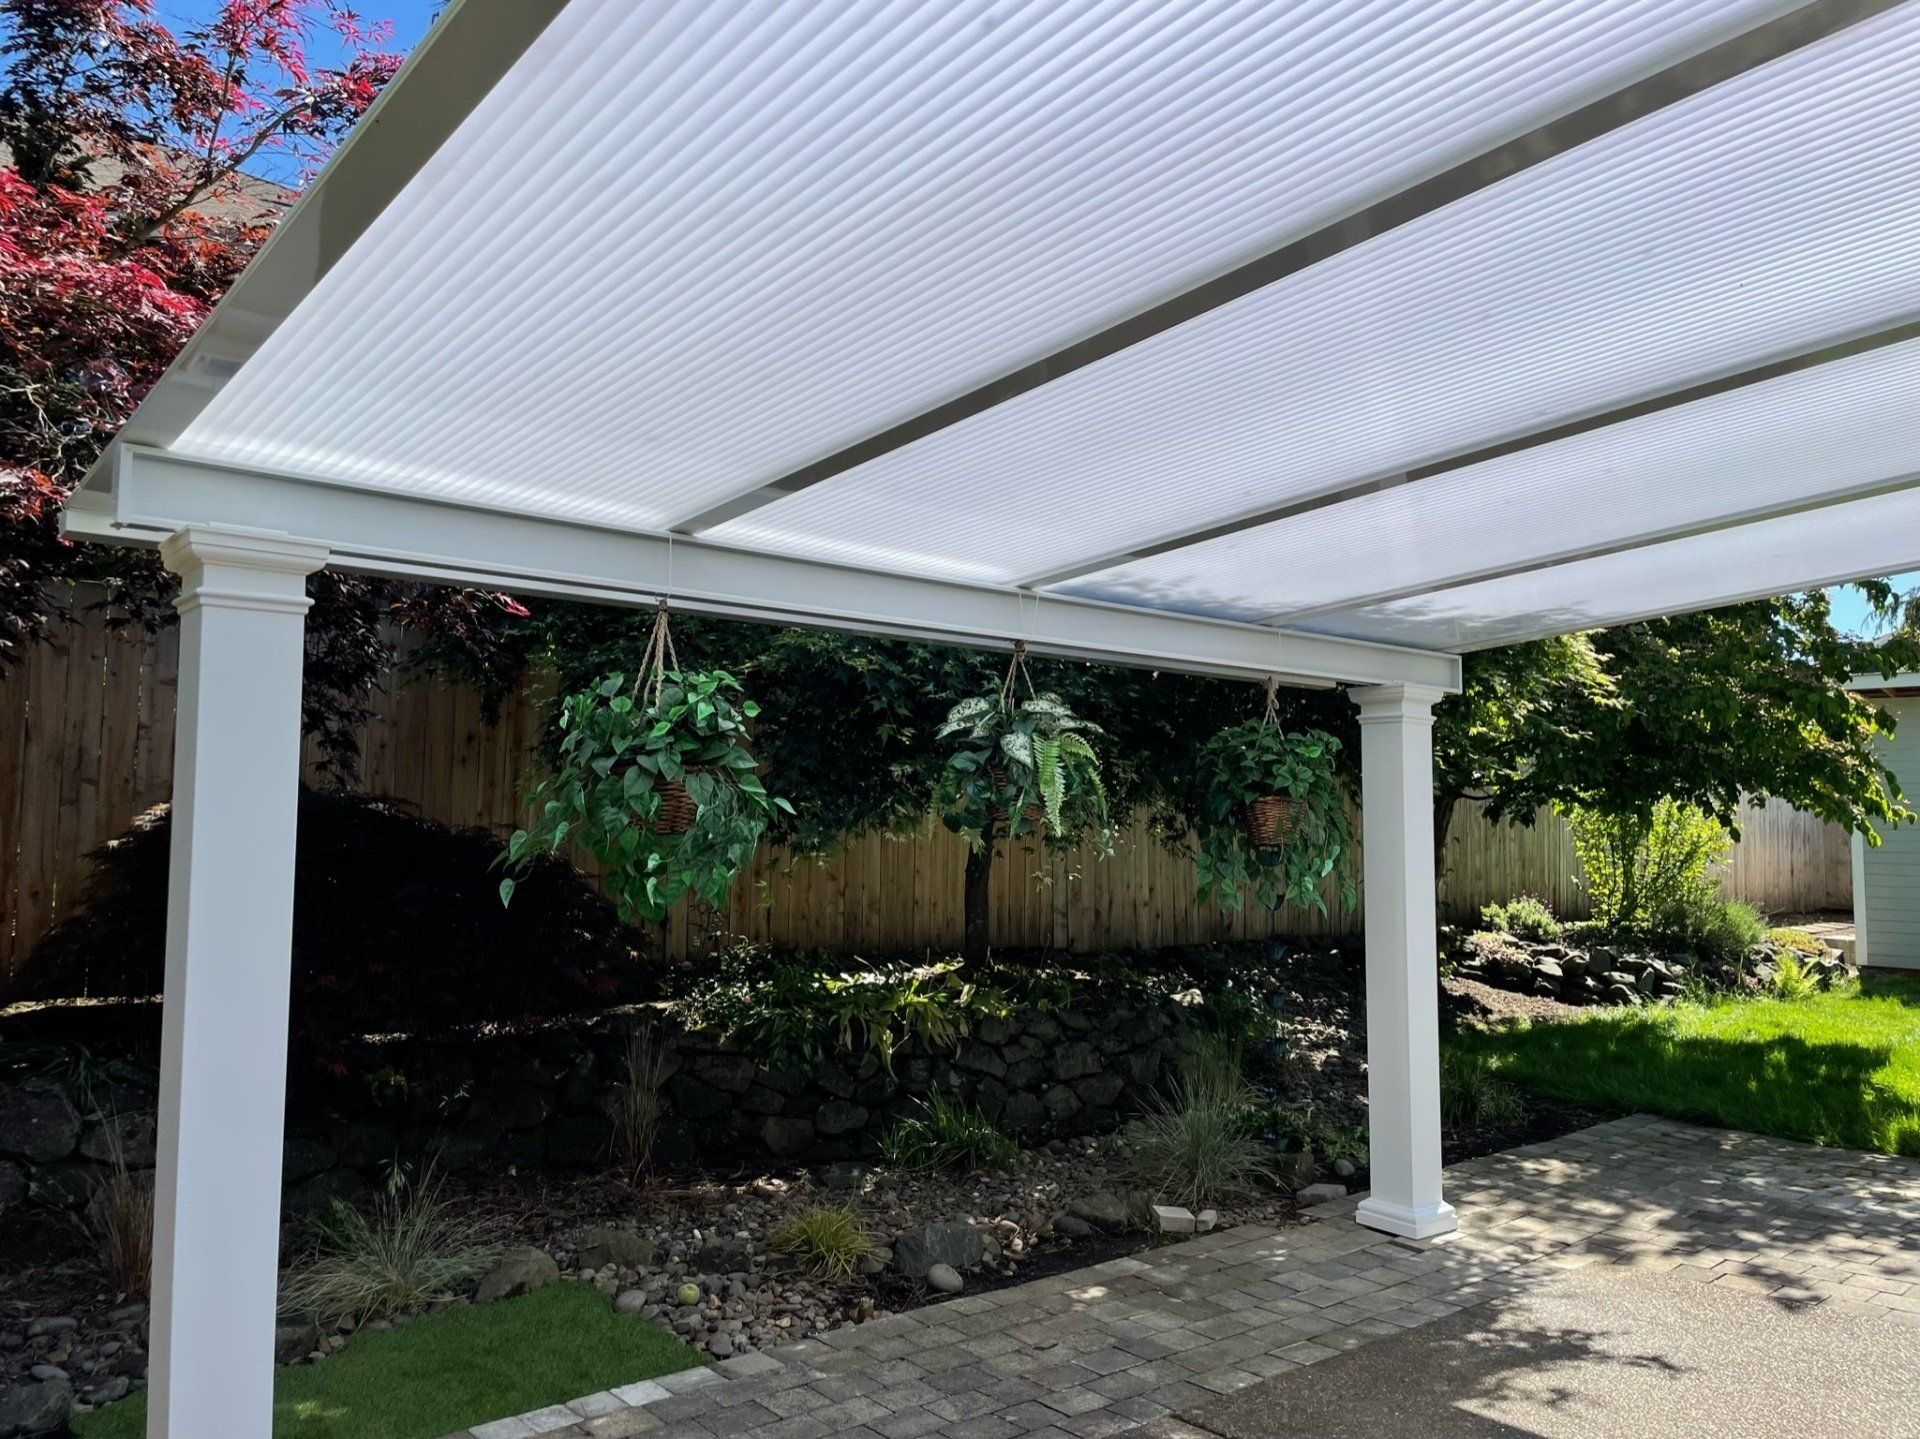 Portland Patio Covers - Shed Style in White with Acrylic